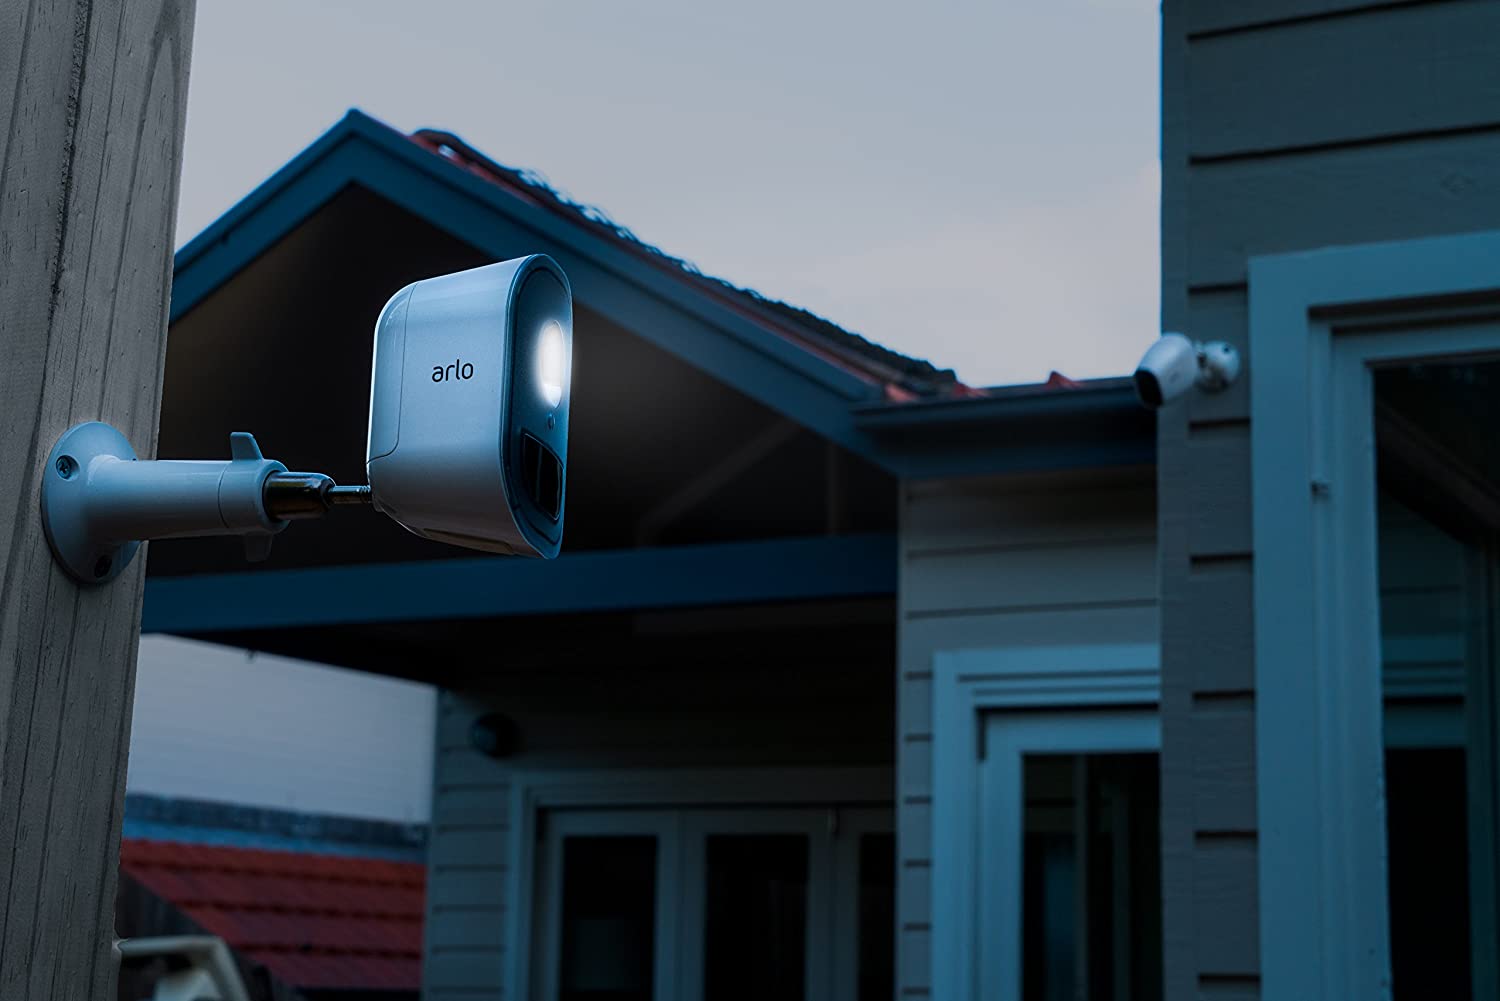 The 10 Best Lights for Home Security and Where to Place Them for Maximum Effectiveness